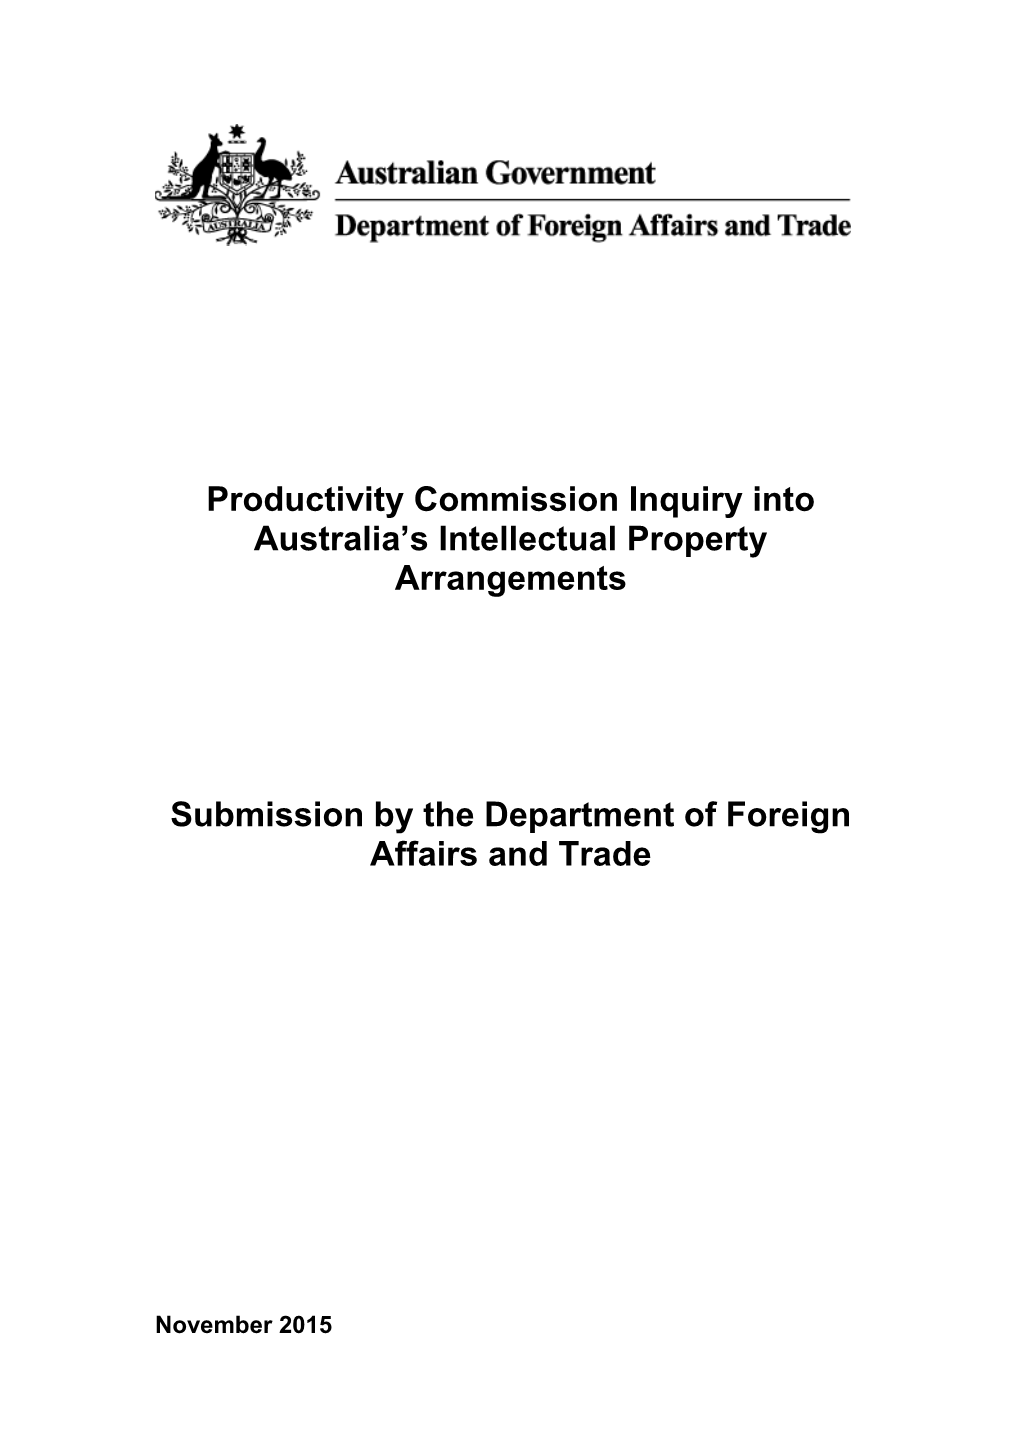 Submission 65 - Department of Foreign Affairs and Trade - Intellectual Property Arrangements